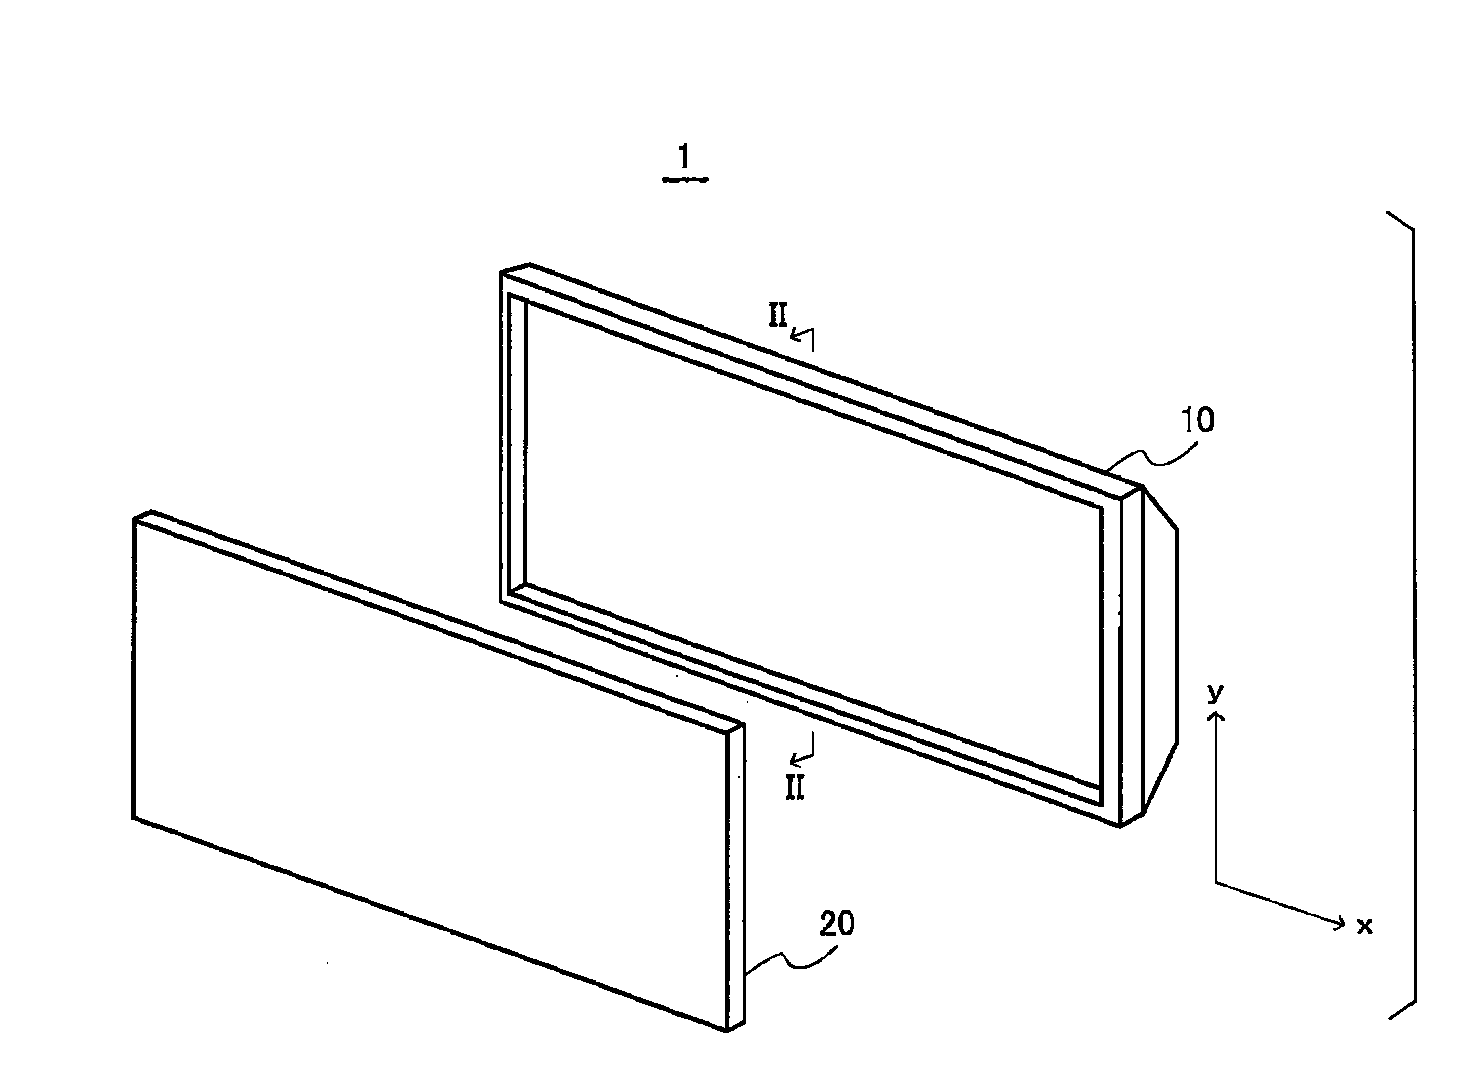 Optical sheet for backlight, backlight, and display device